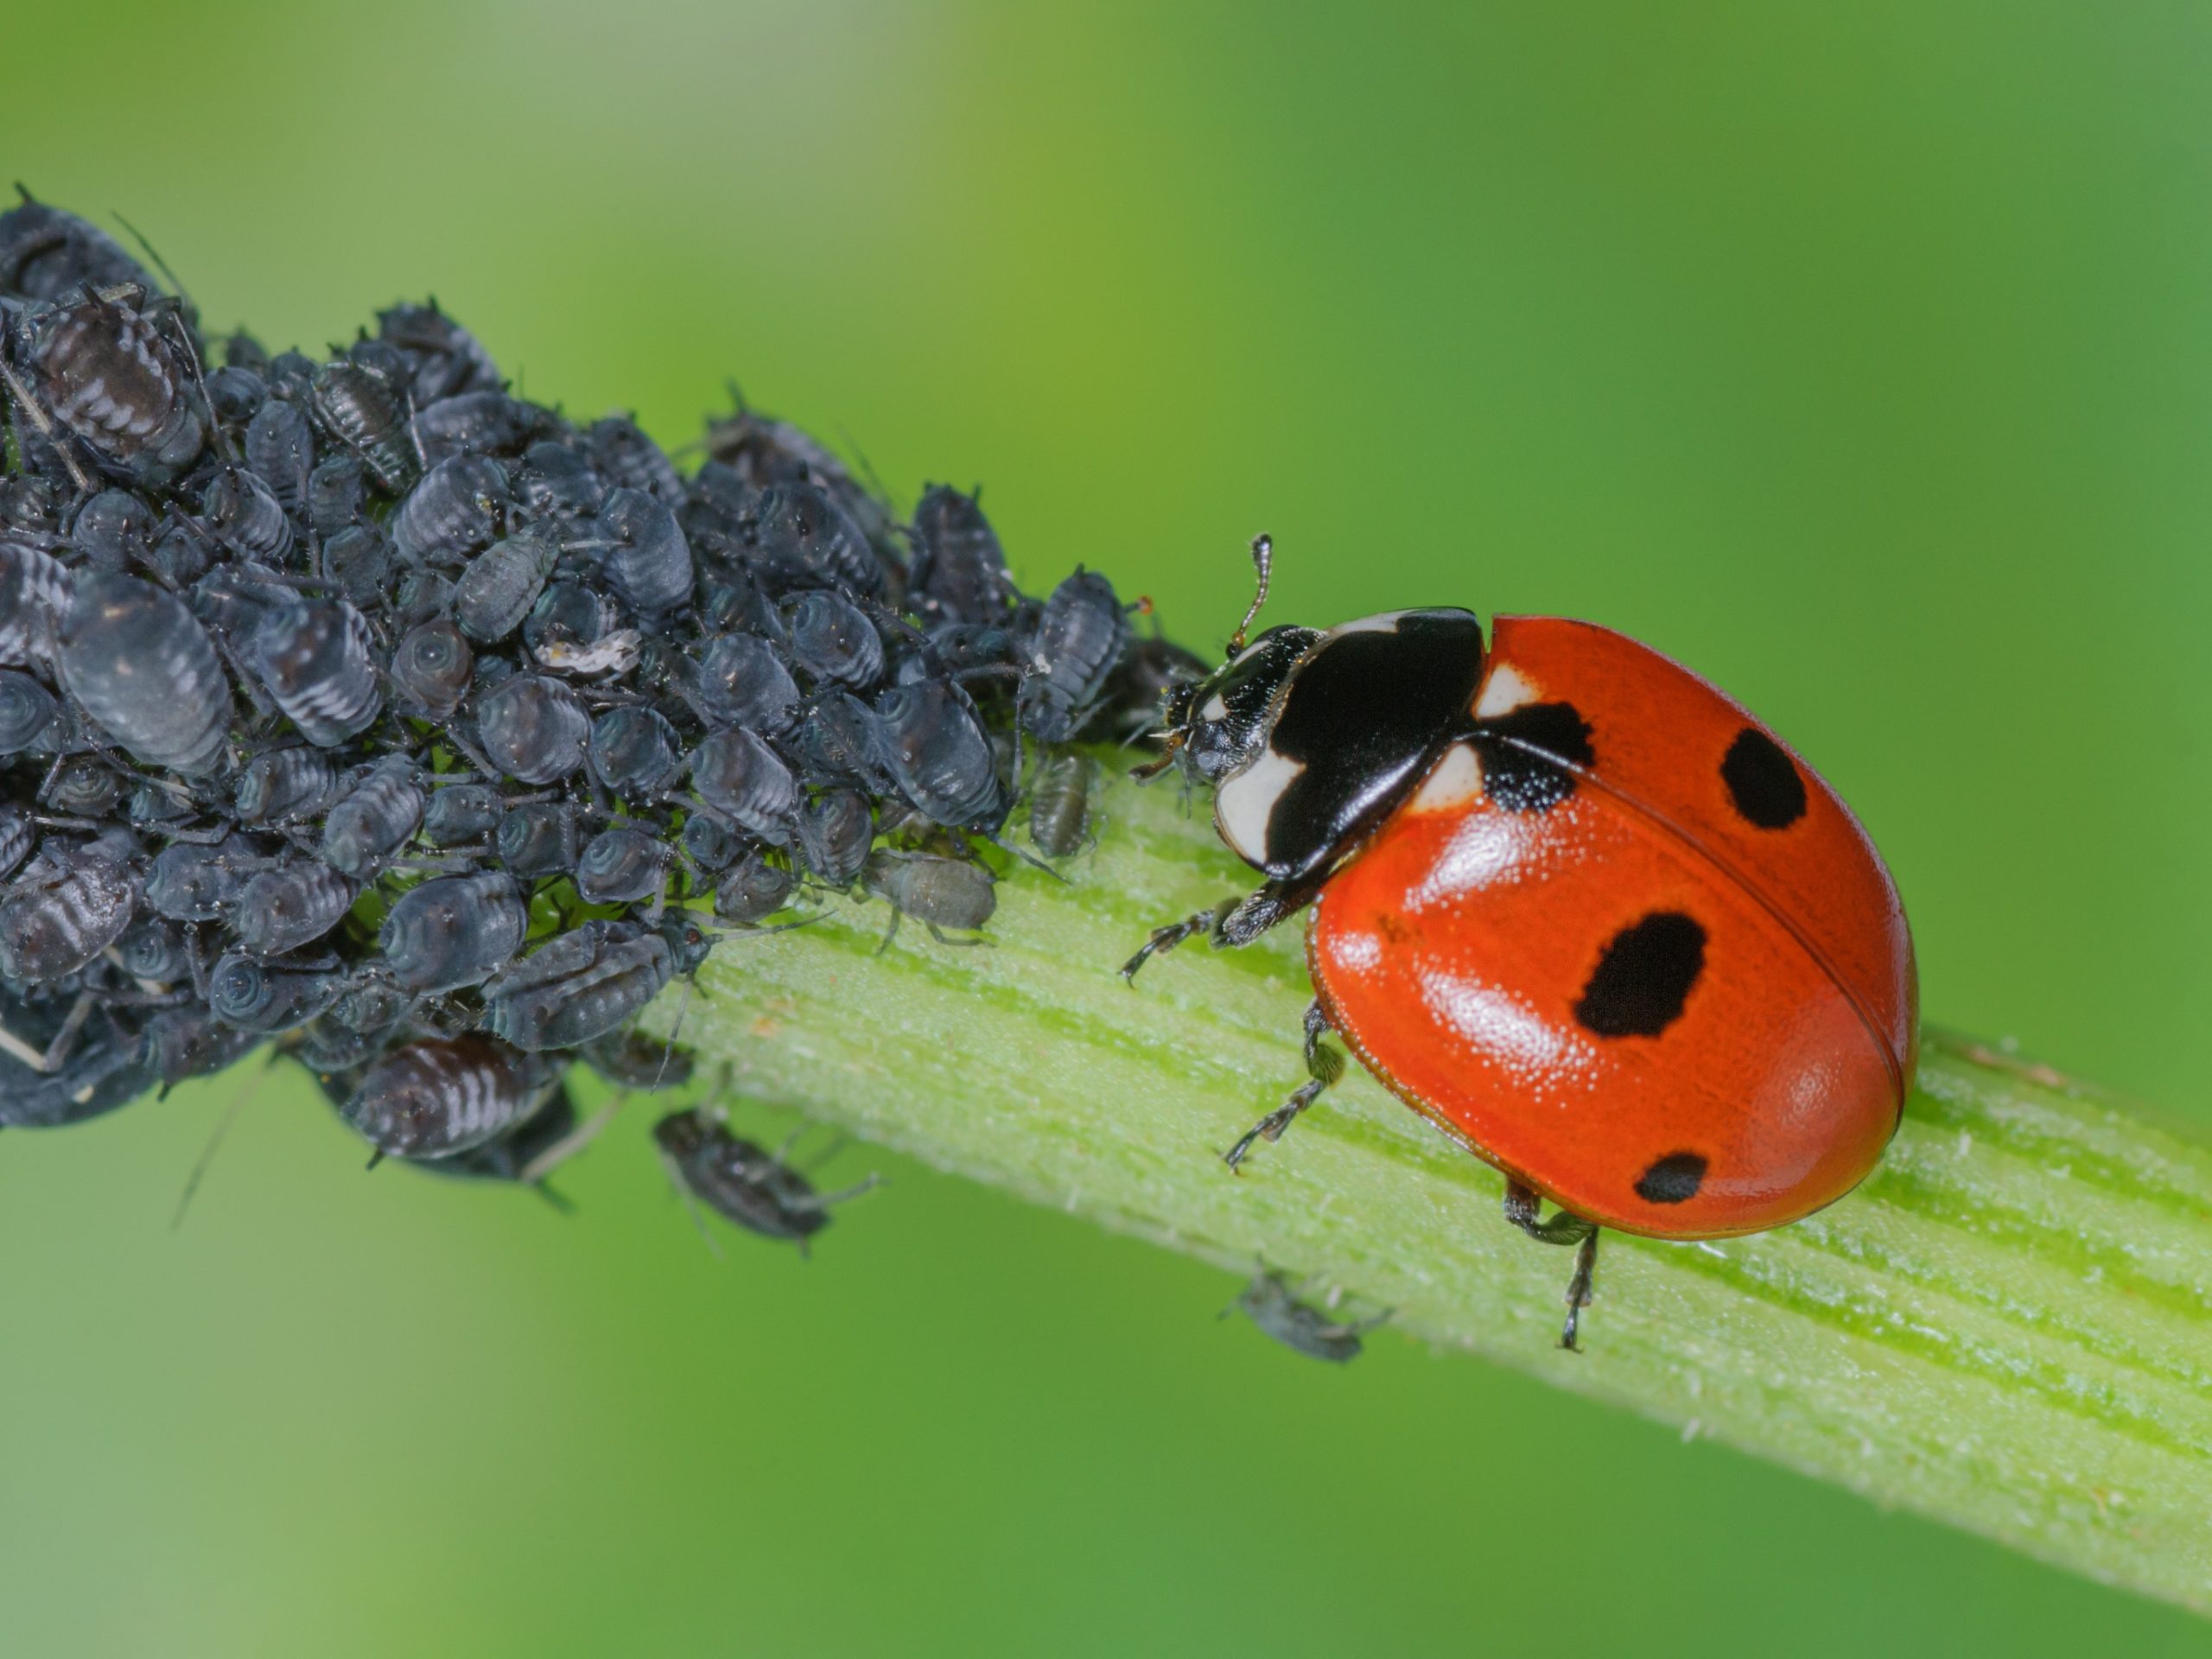 A ladybug being a beneficial isnects and hunting aphids on a plant.